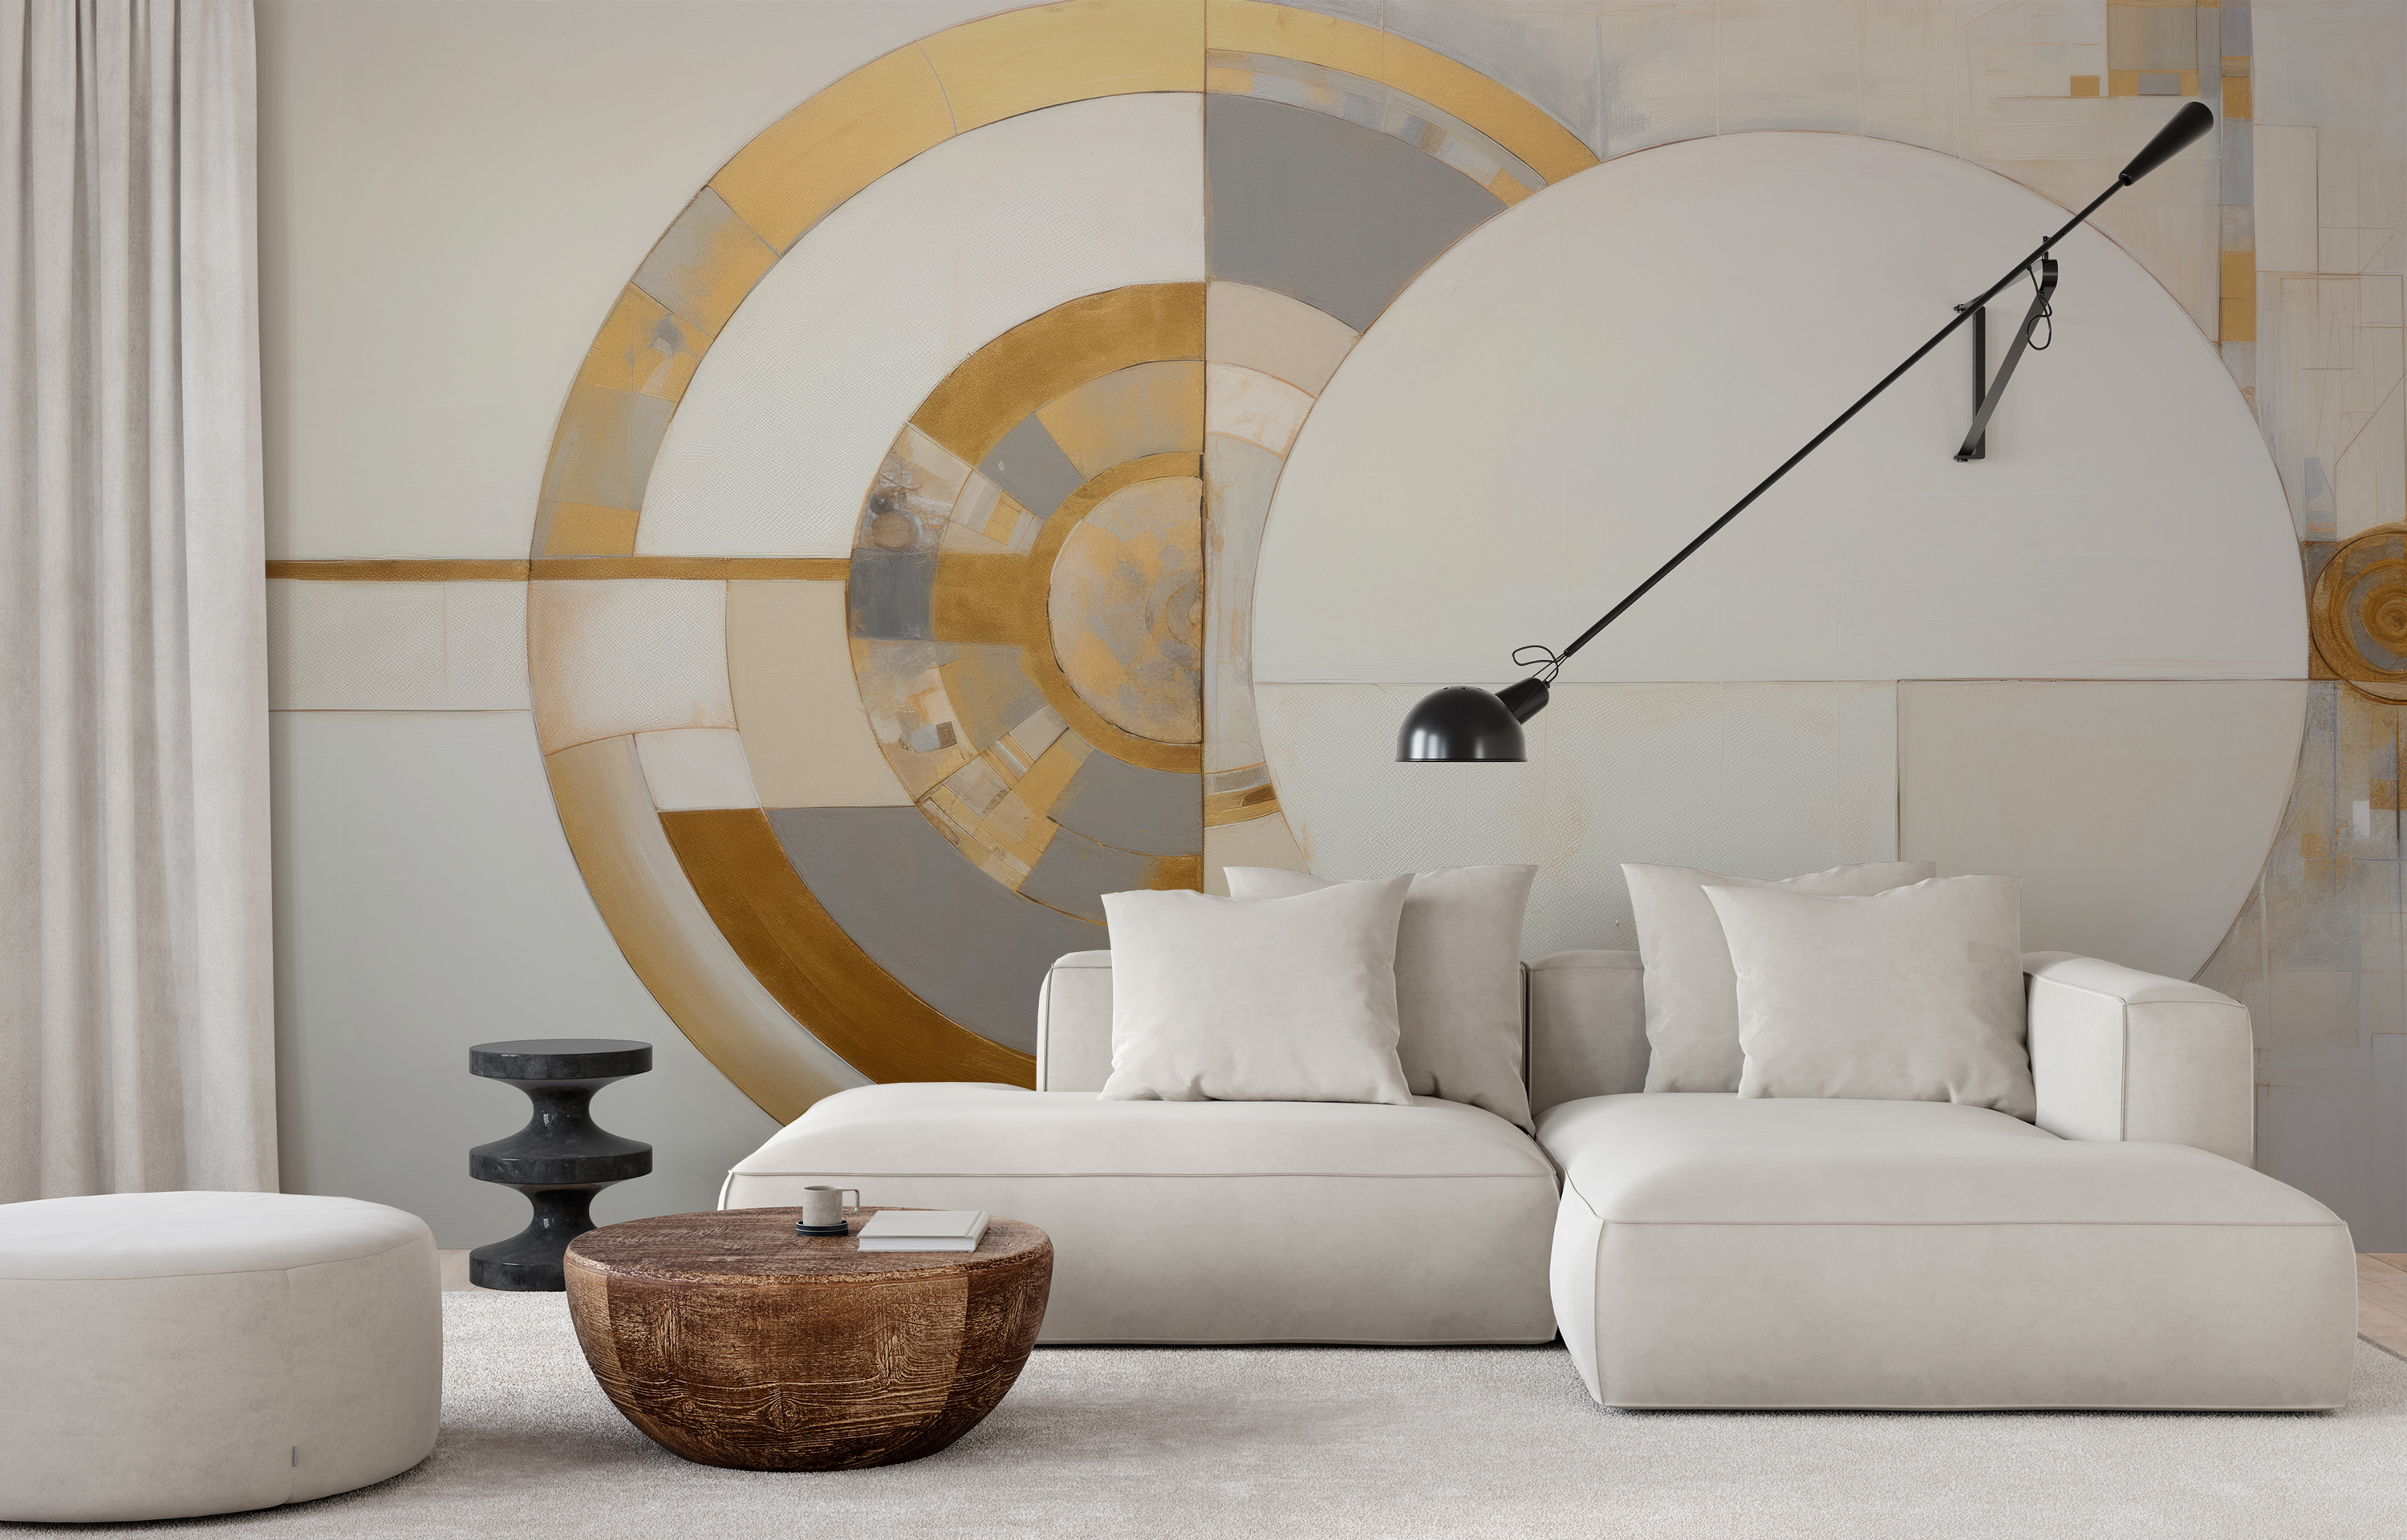 This wallpaper showcases an abstract geometric pattern with striking symmetry around a golden axis. The pattern combines circles and arcs in shades of white and gold, with subtle gray tones, creating a sense of balance and luxurious sophistication.